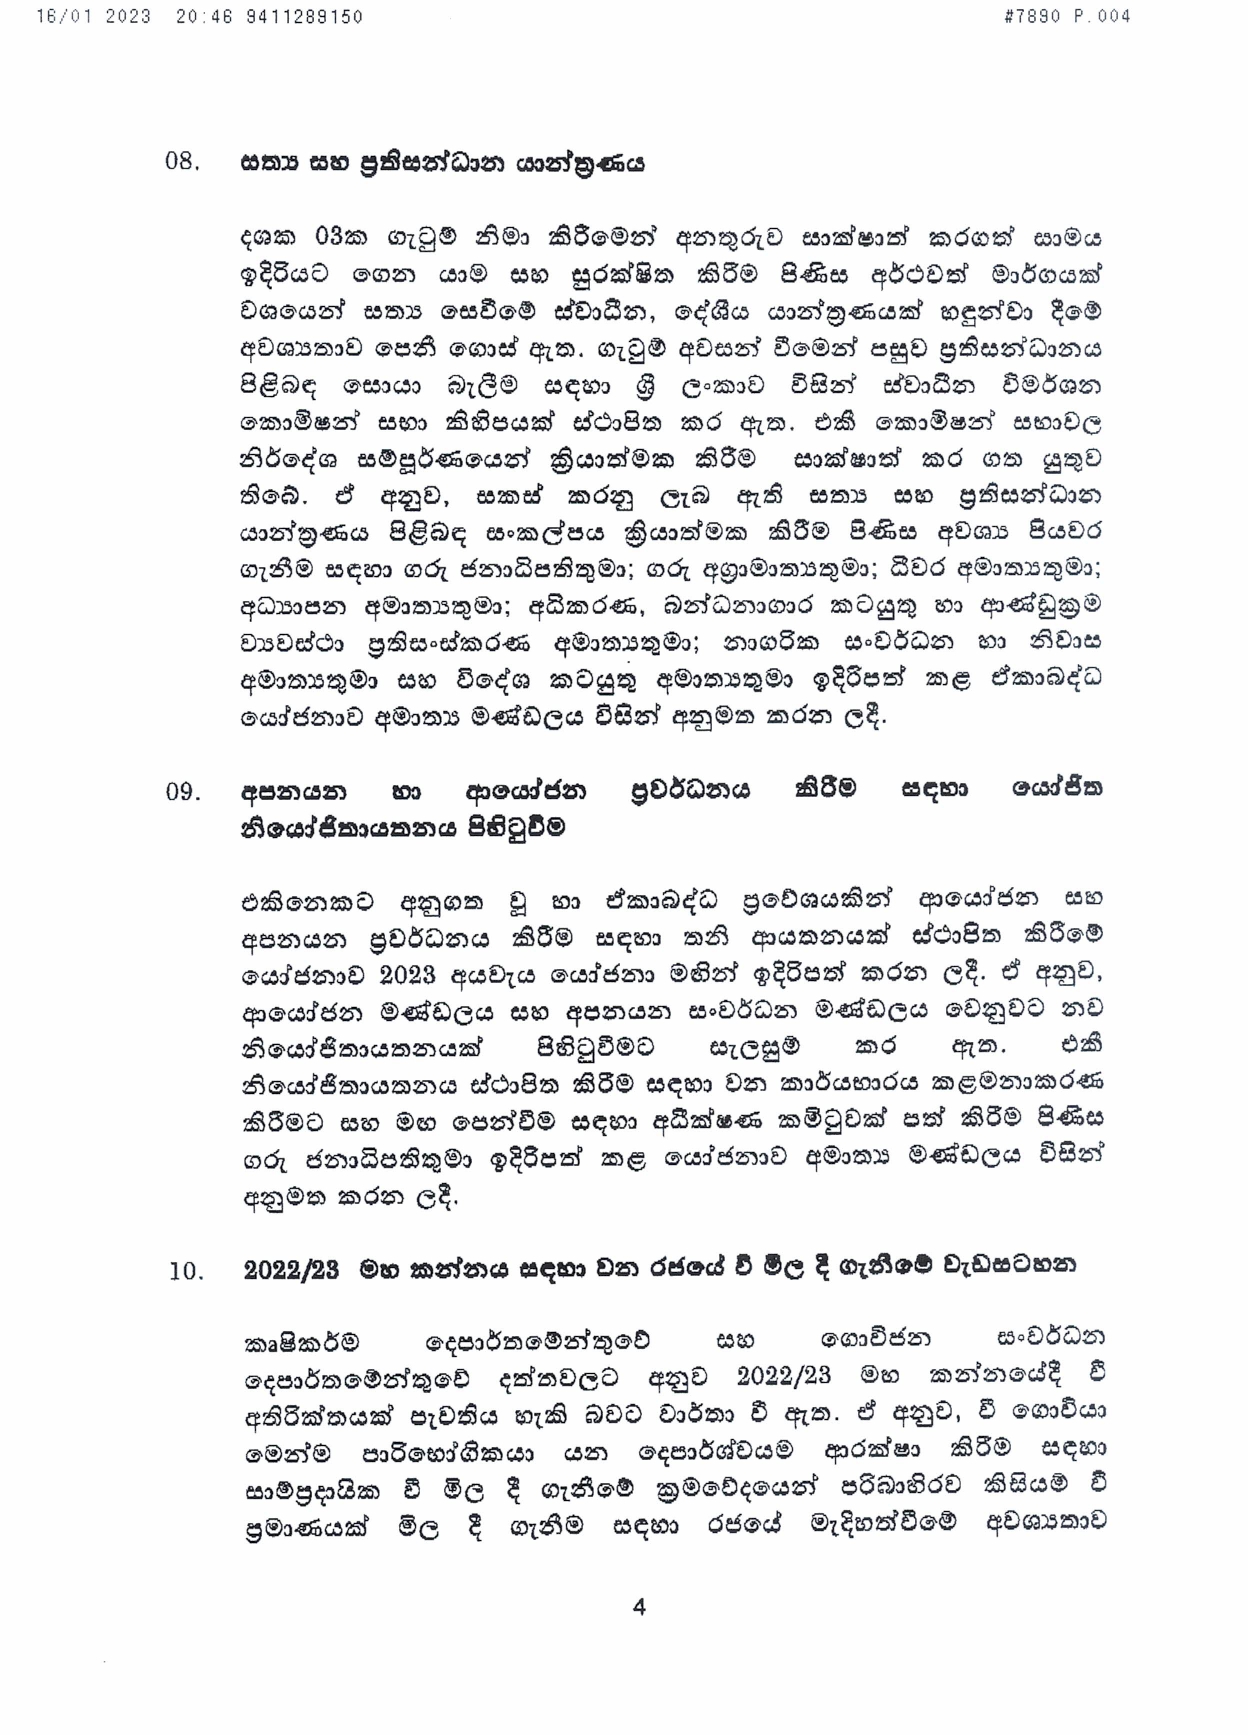 Cabinet Decision on 16.01.2023 page 0004